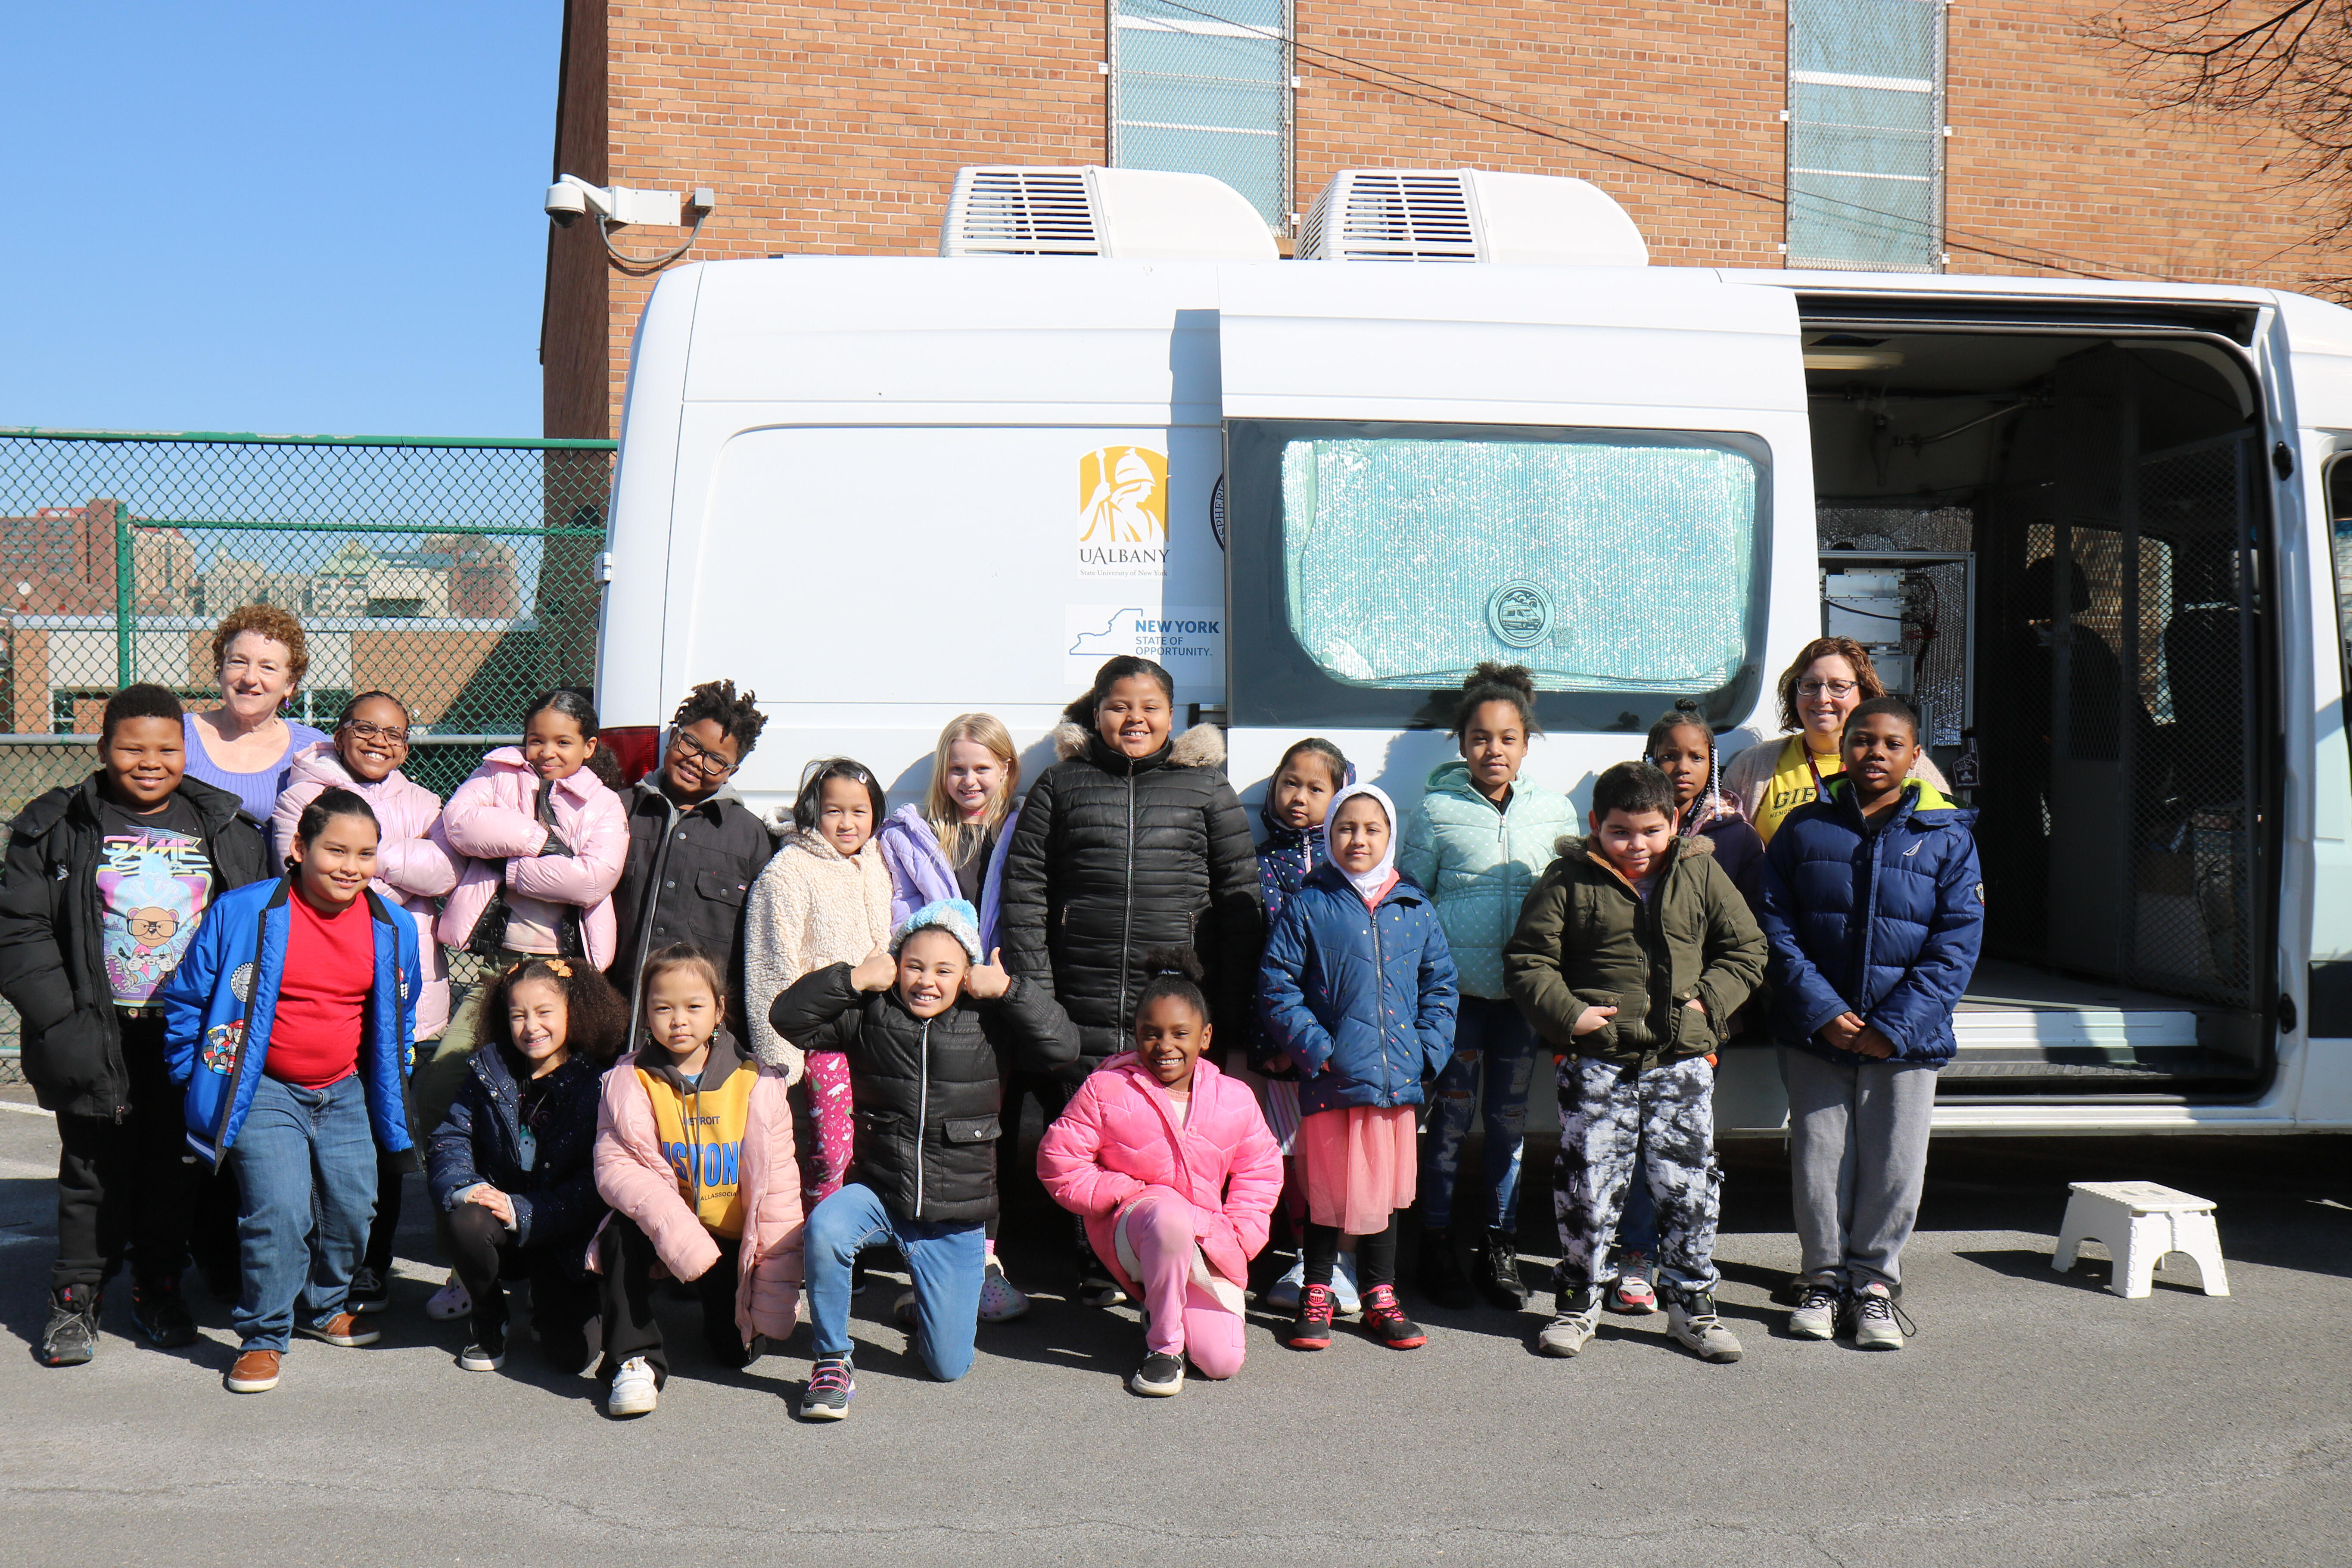 Students posing for a group photo in front of the air quality monitoring van